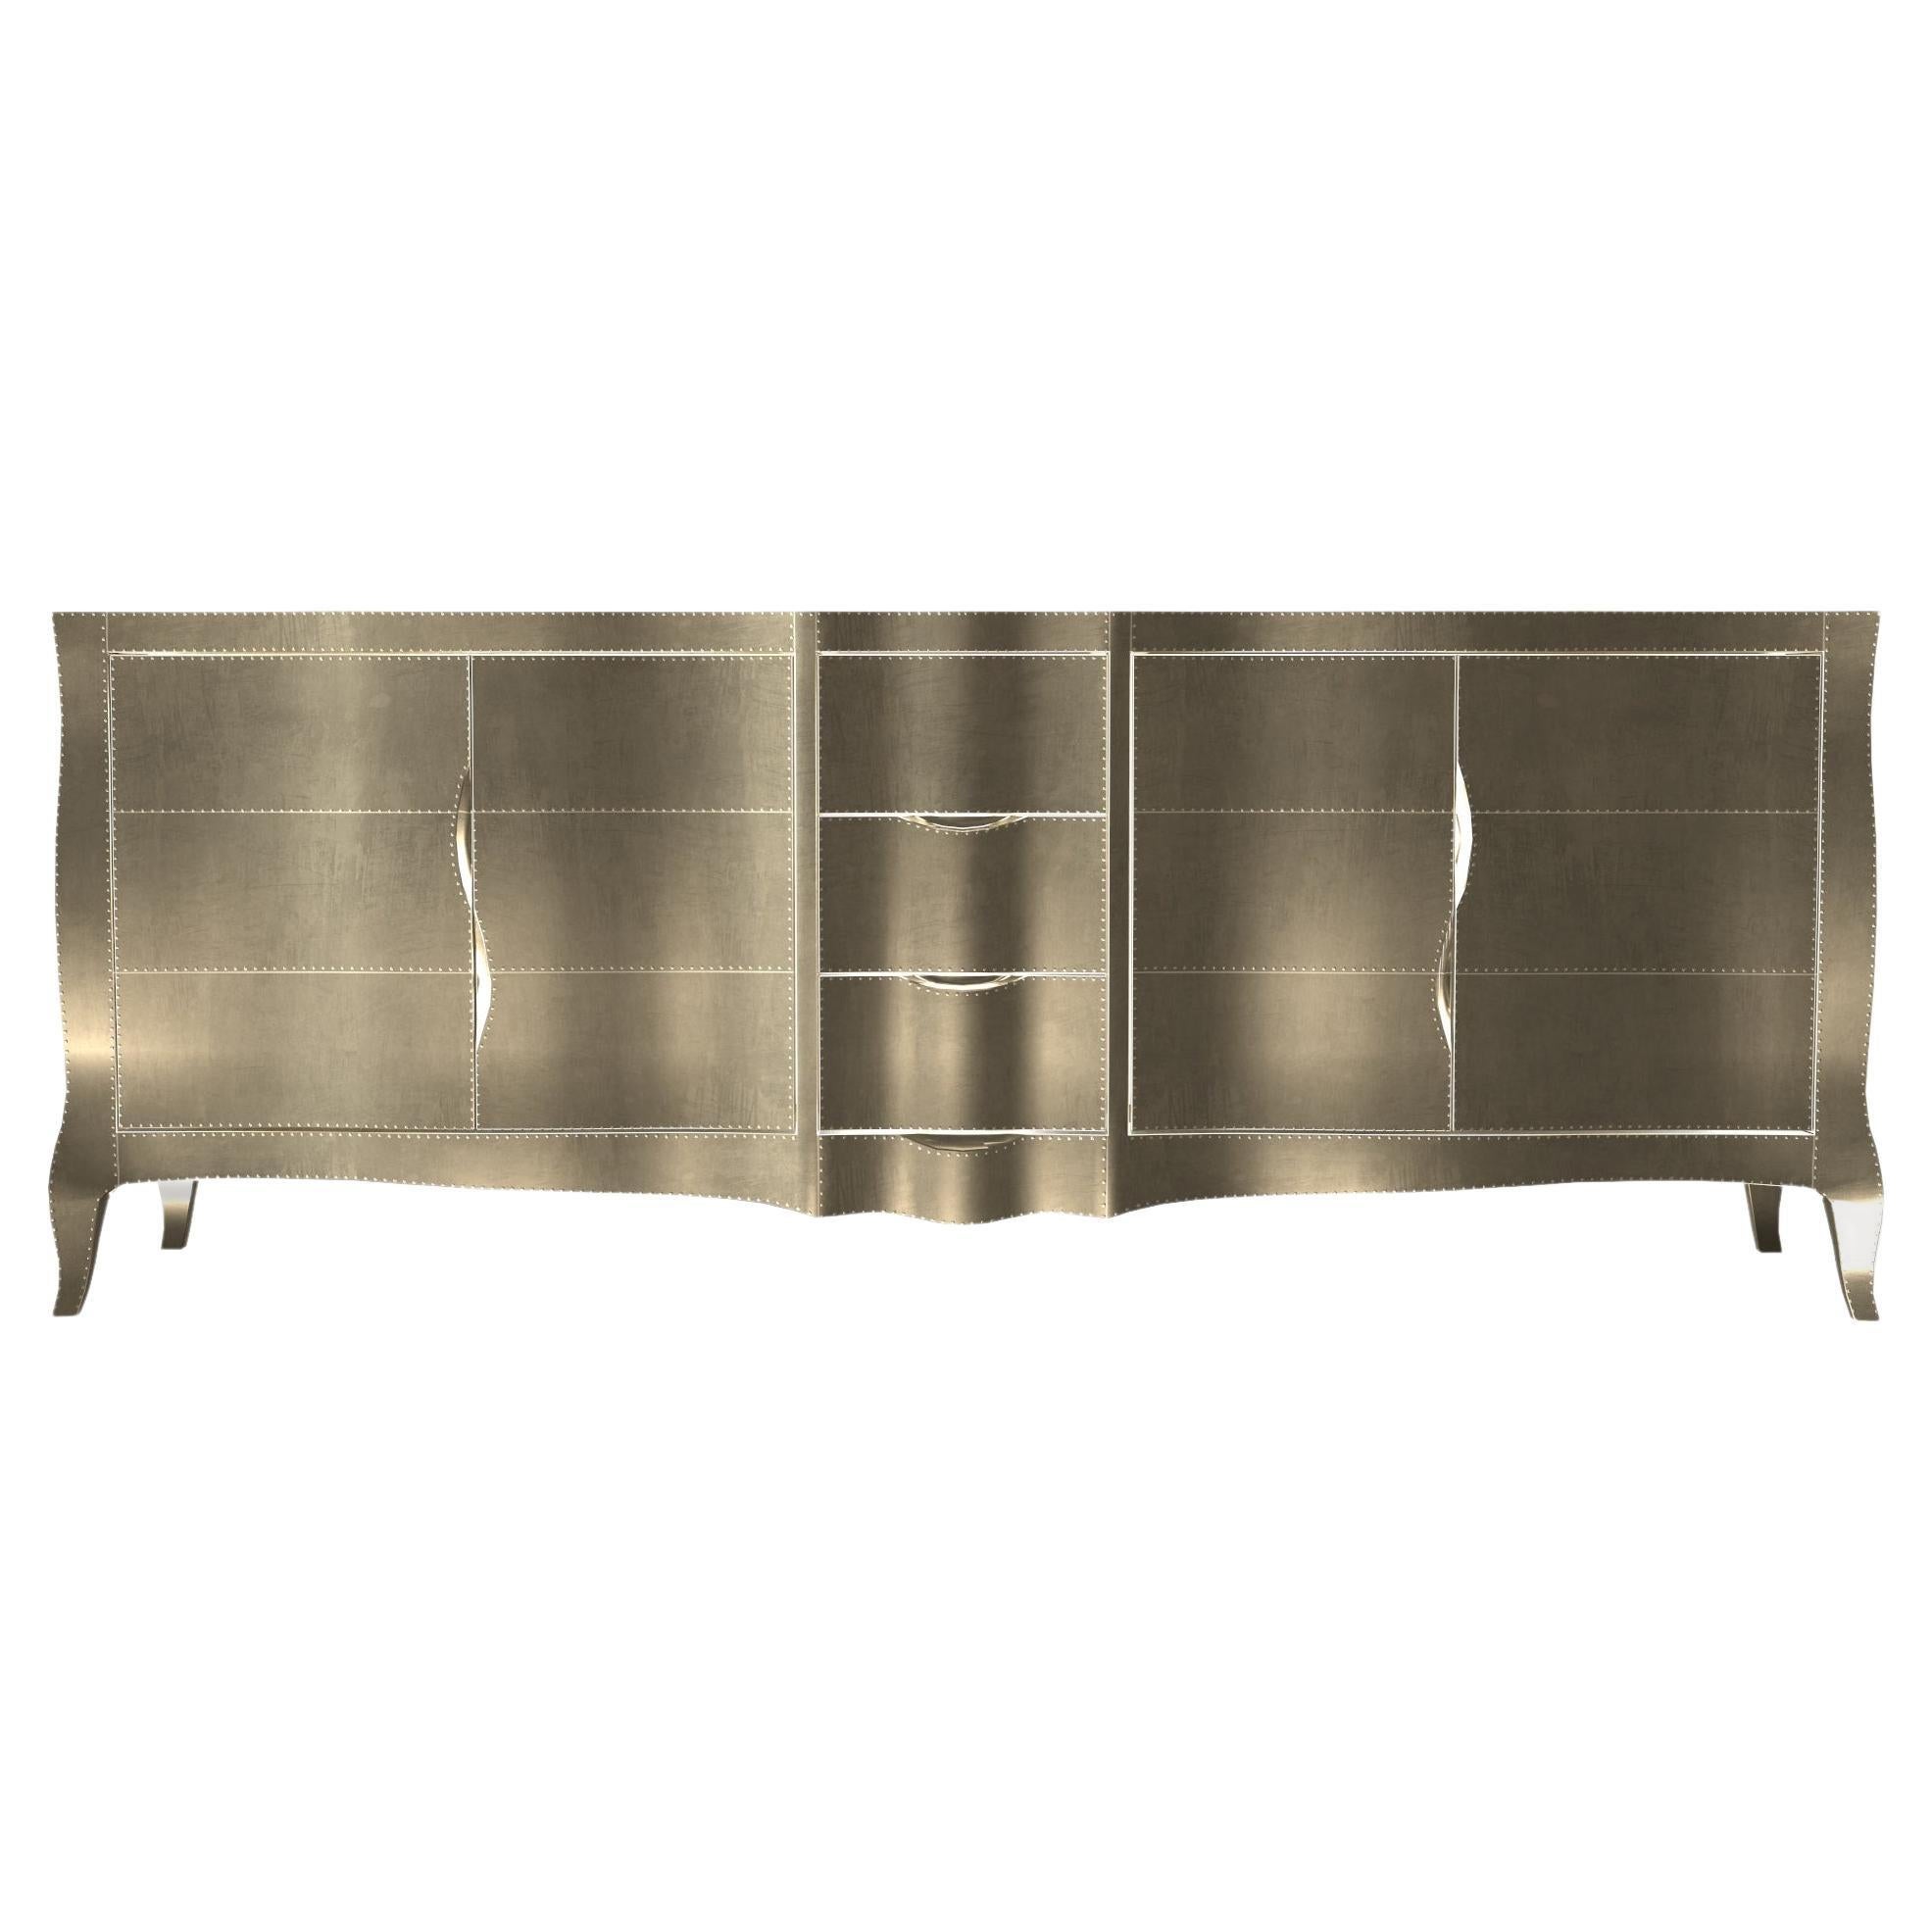 Louise Credenza Art Deco Credenzas in Smooth Brass by Paul Mathieu for S Odegard